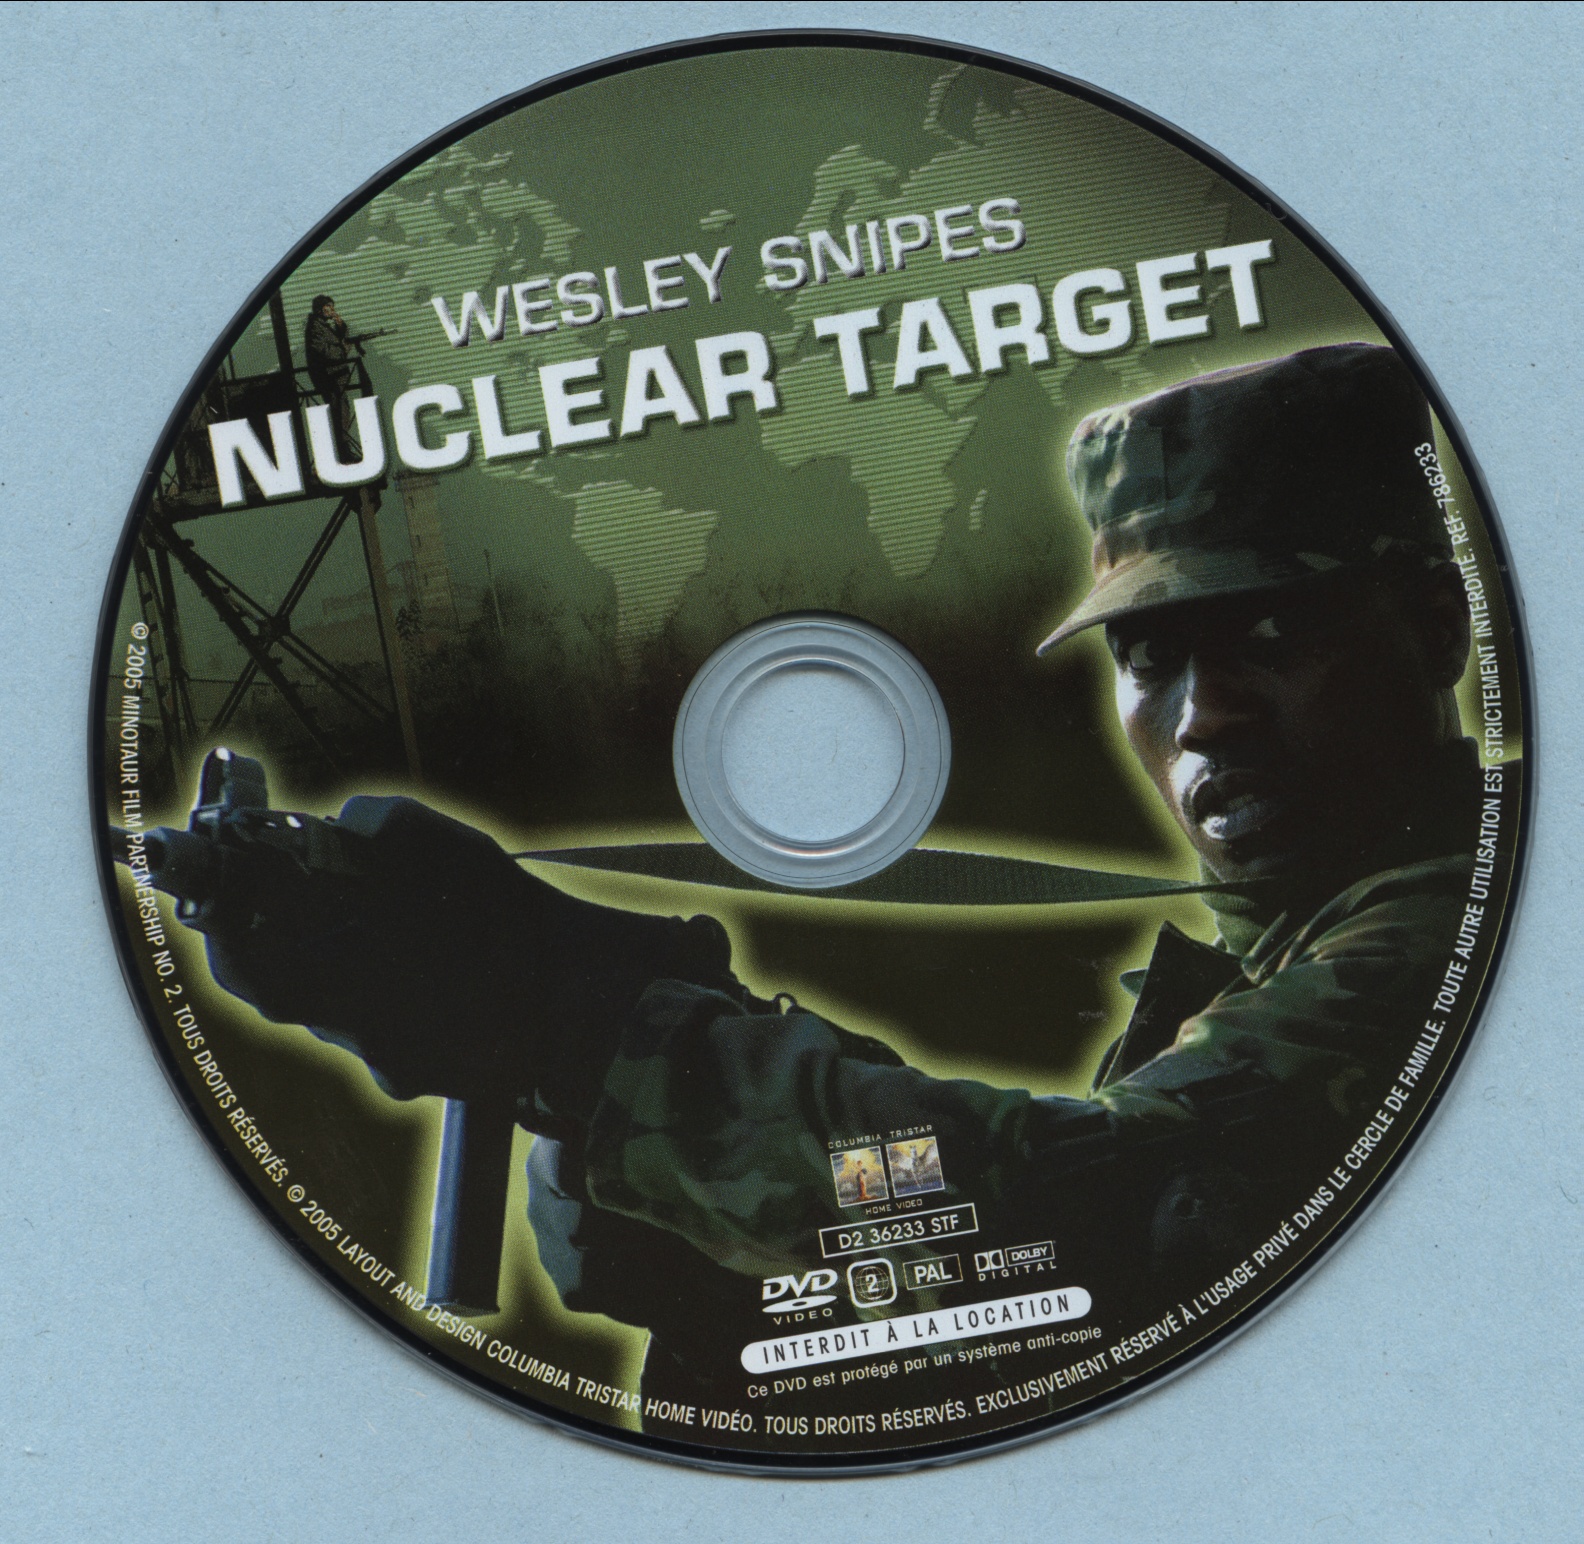 Nuclear Target